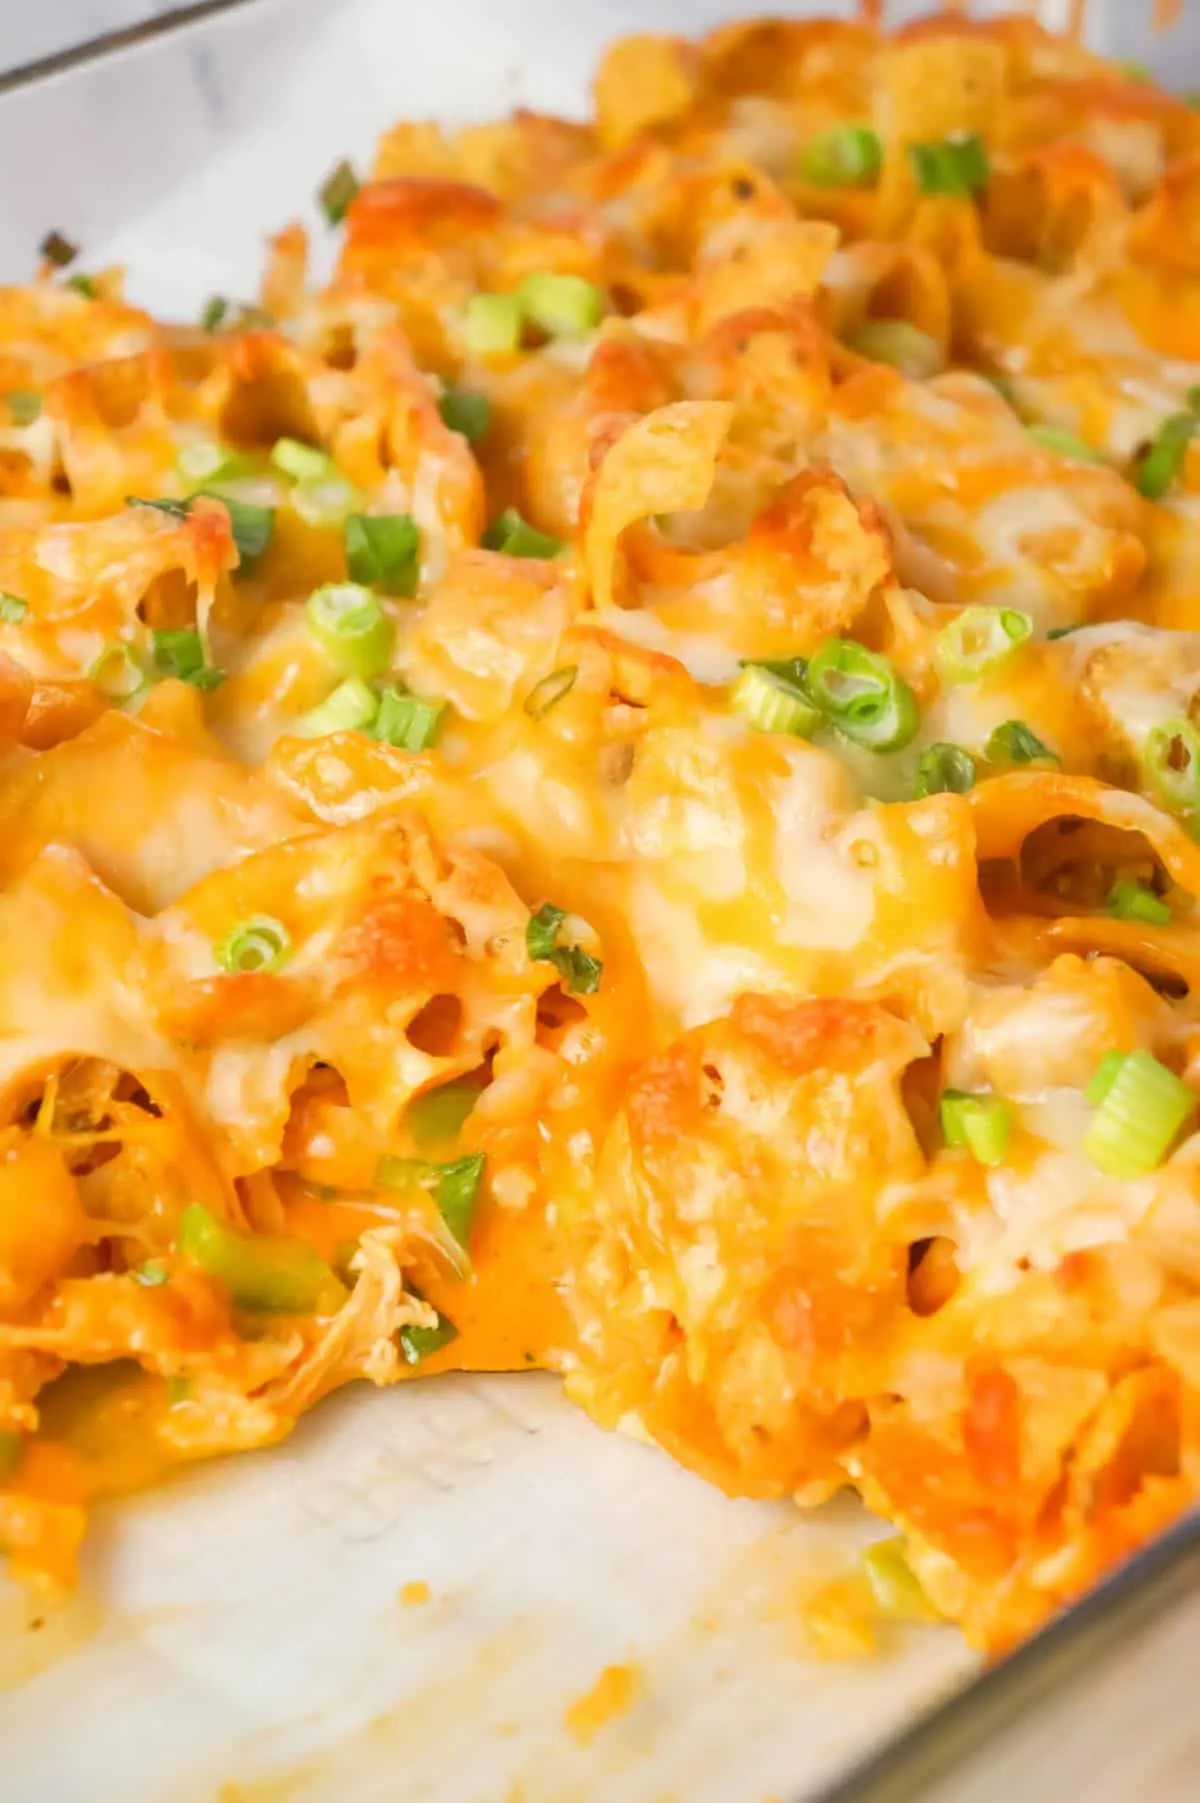 Buffalo Chicken Frito Pie is an easy casserole recipe using shredded rotisserie chicken and diced celery tossed in Buffalo sauce and ranch dressing, all topped with Fritos corn chips and cheese.